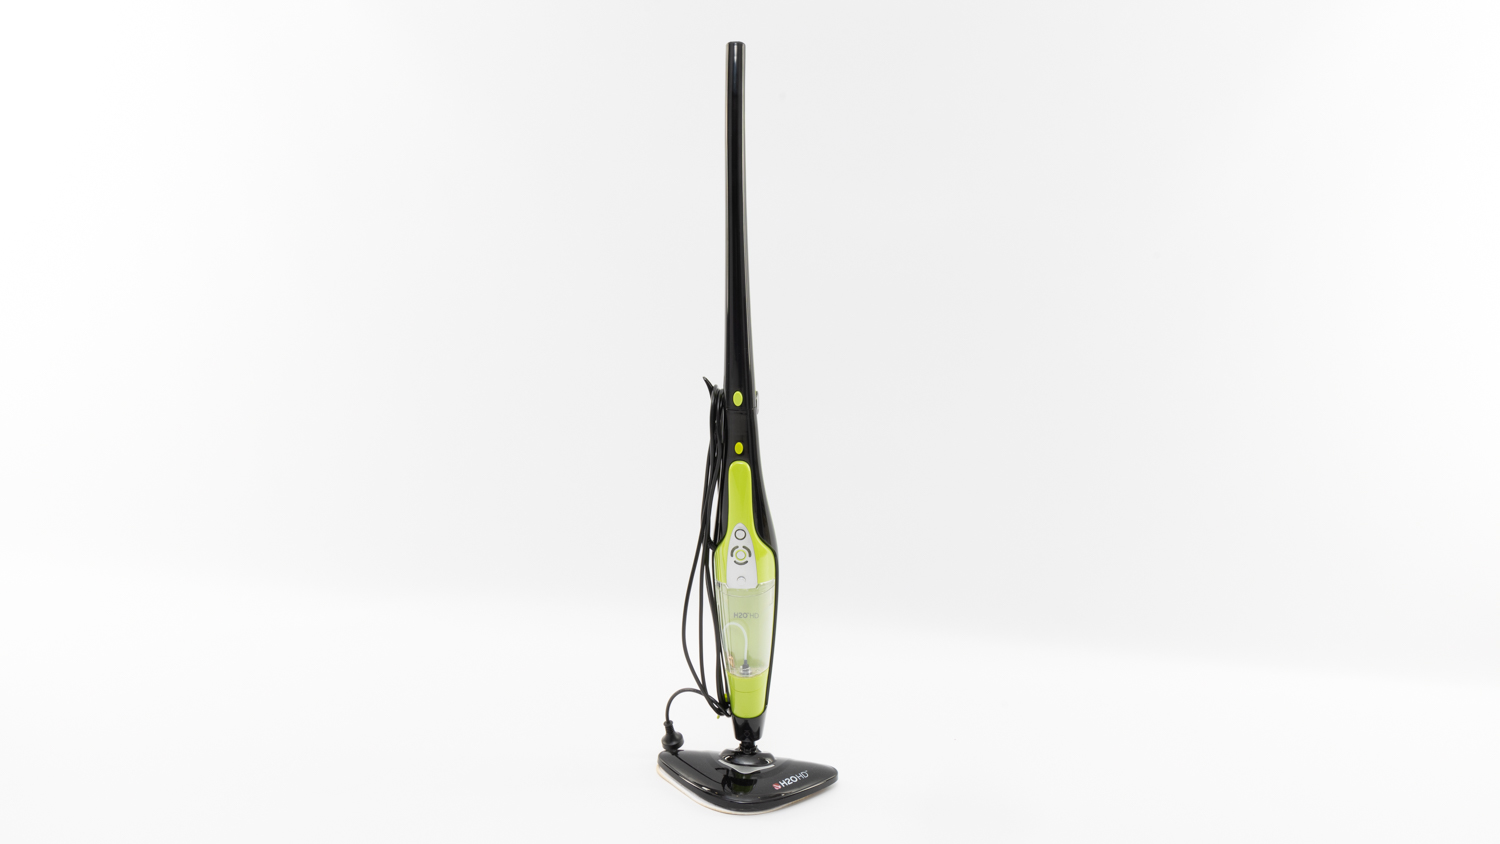 Thane H2OHD High Definition Steam Cleaner KB-019 carousel image